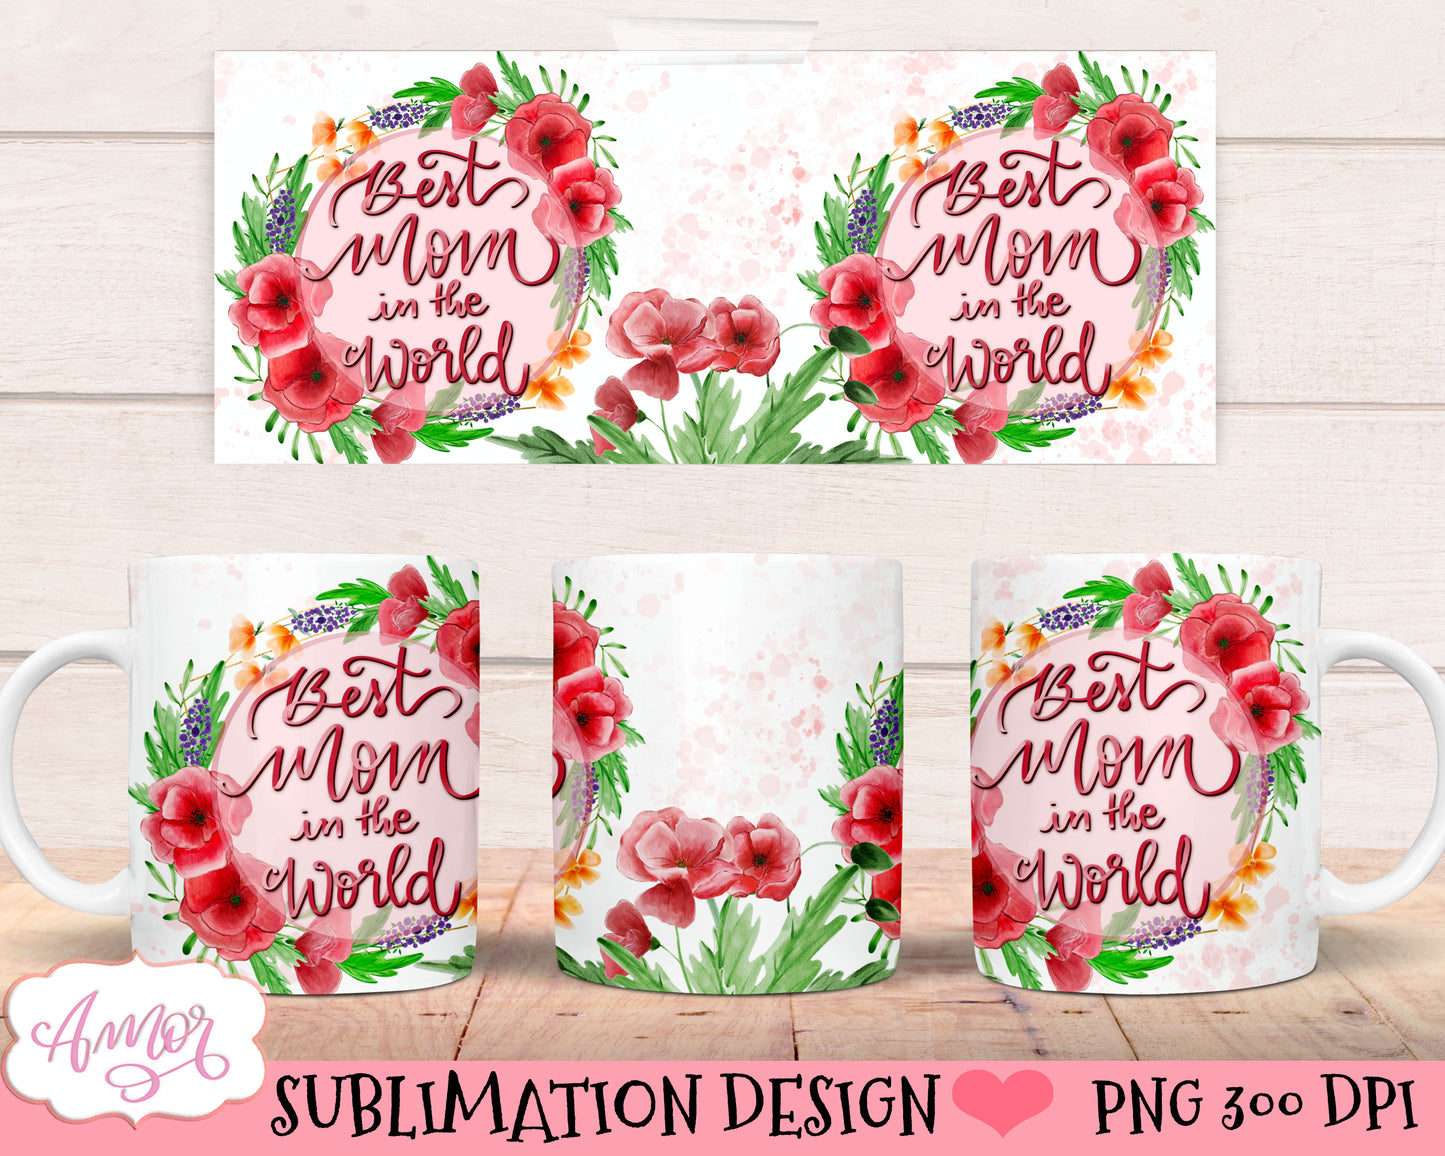 Best Mom in the World mug wrap PNG for sublimation